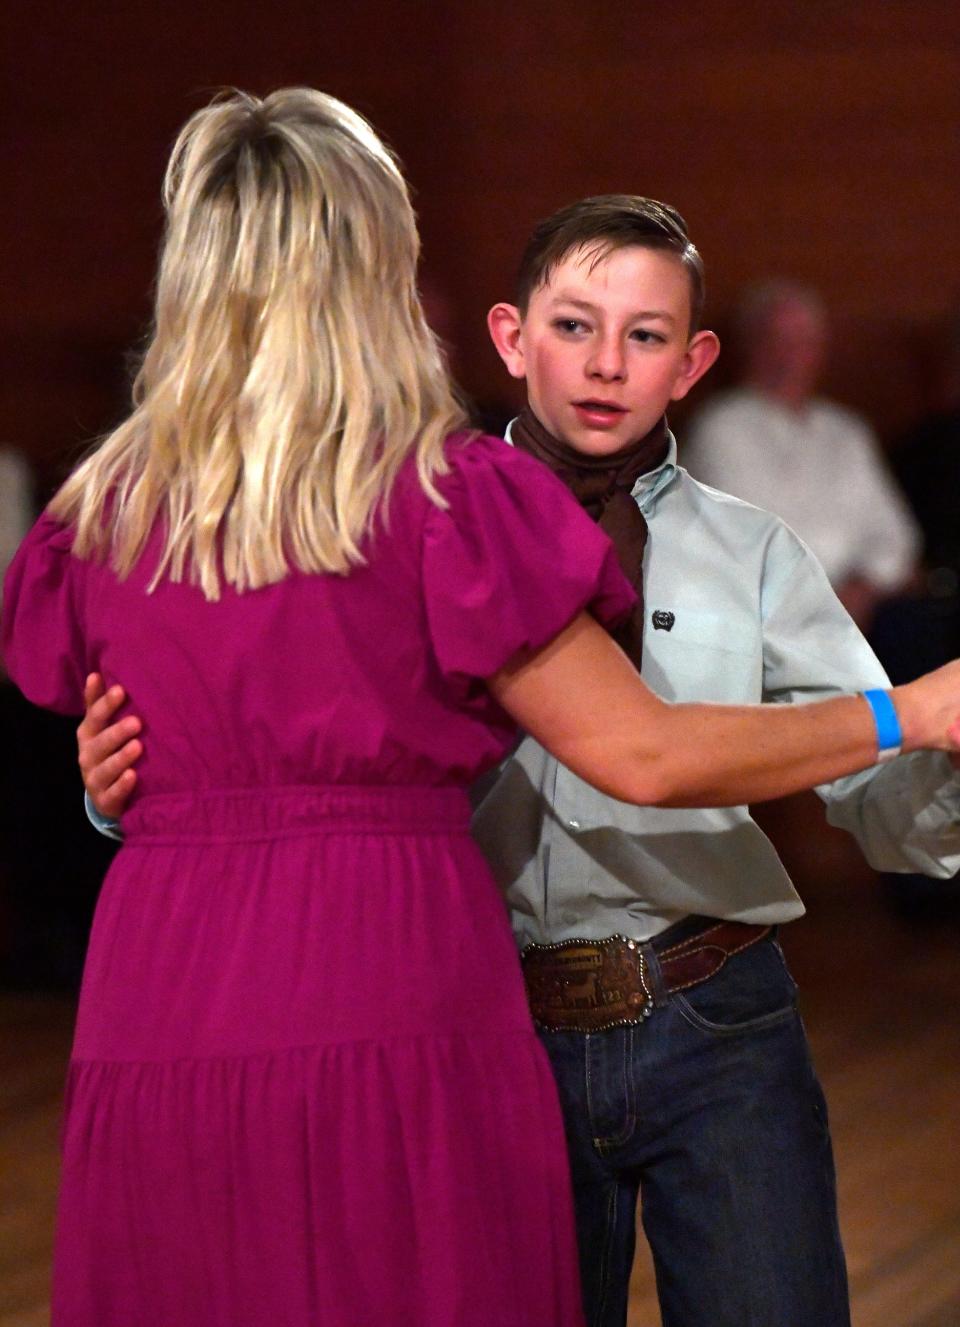 Hagen Hudson, 13, dances with his mother Lindsay during the Texas Cowboys’ Christmas Ball in Anson Dec. 14. The Hudson family traveled from Pampa to partake in the annual holiday tradition.